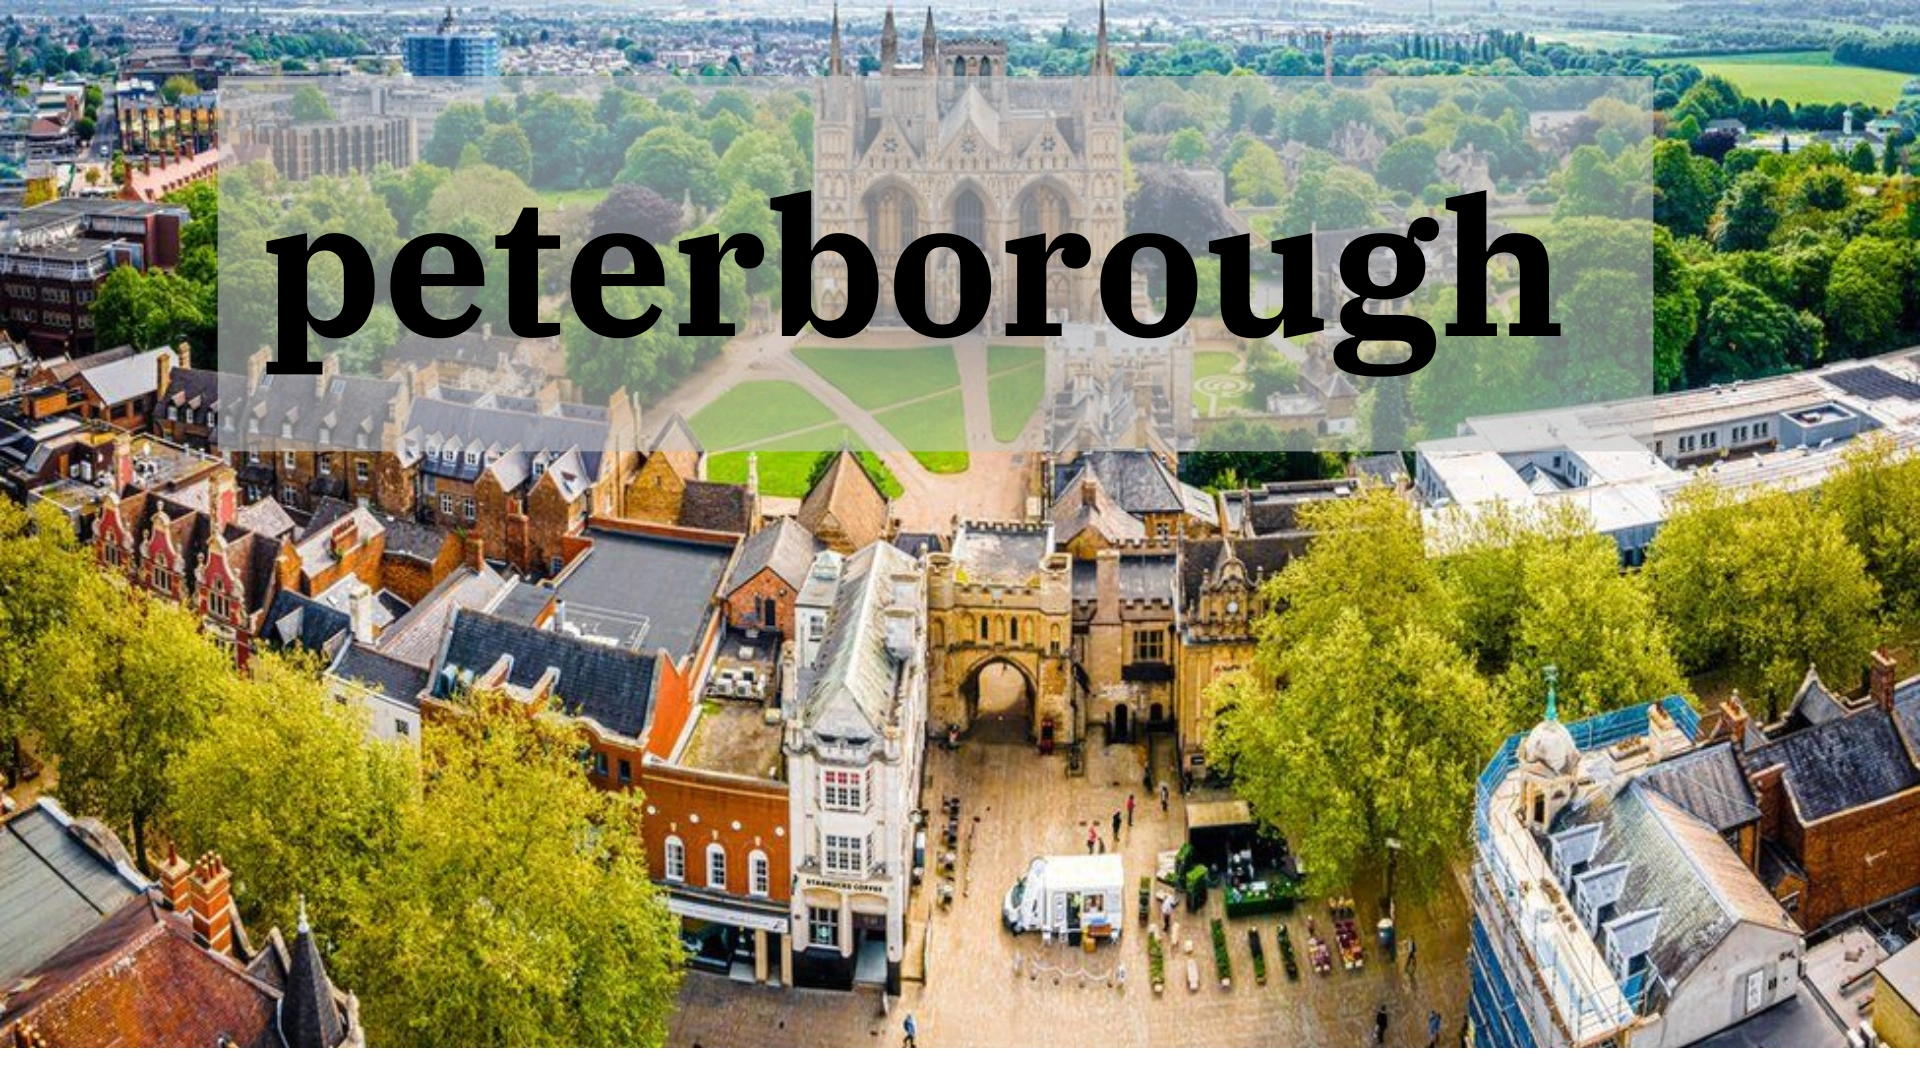 Experience What is Famous in Peterborough: A VacationWaits Guide